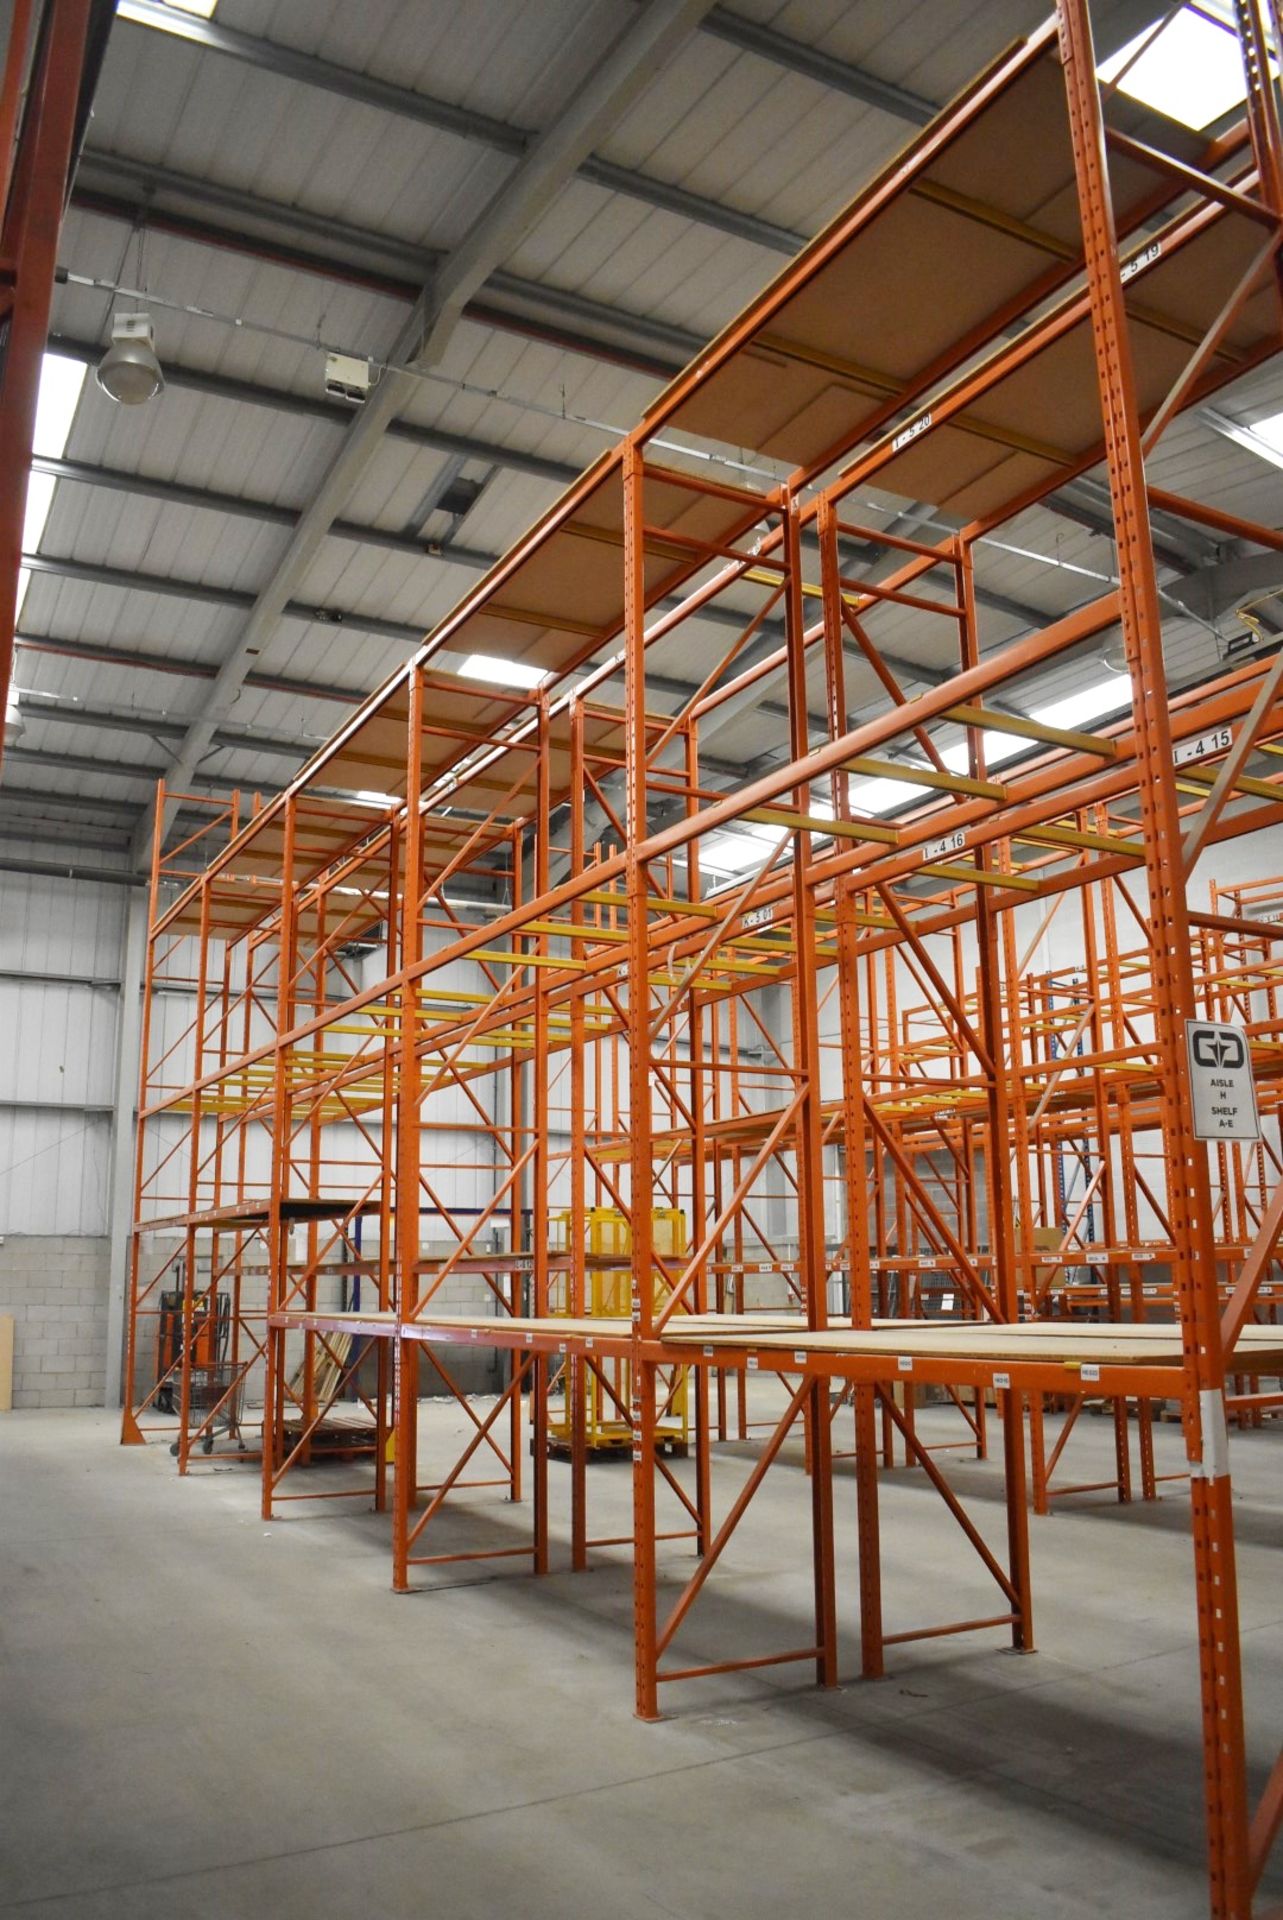 5 x Bays of RediRack Warehouse Pallet Racking - Lot Includes 6 x Uprights and 30 x Crossbeams - - Image 3 of 4